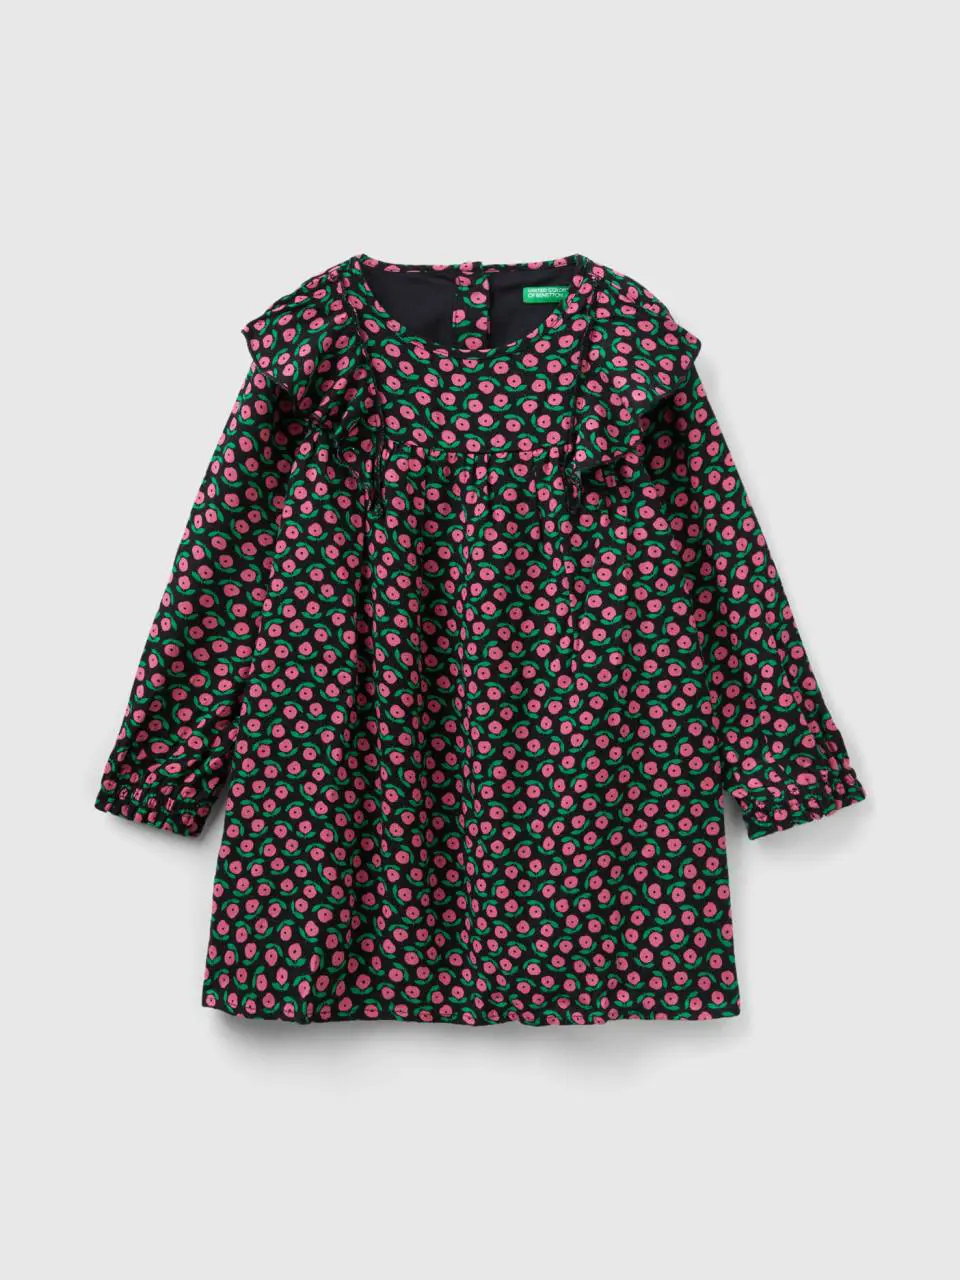 Benetton dress with floral print. 1